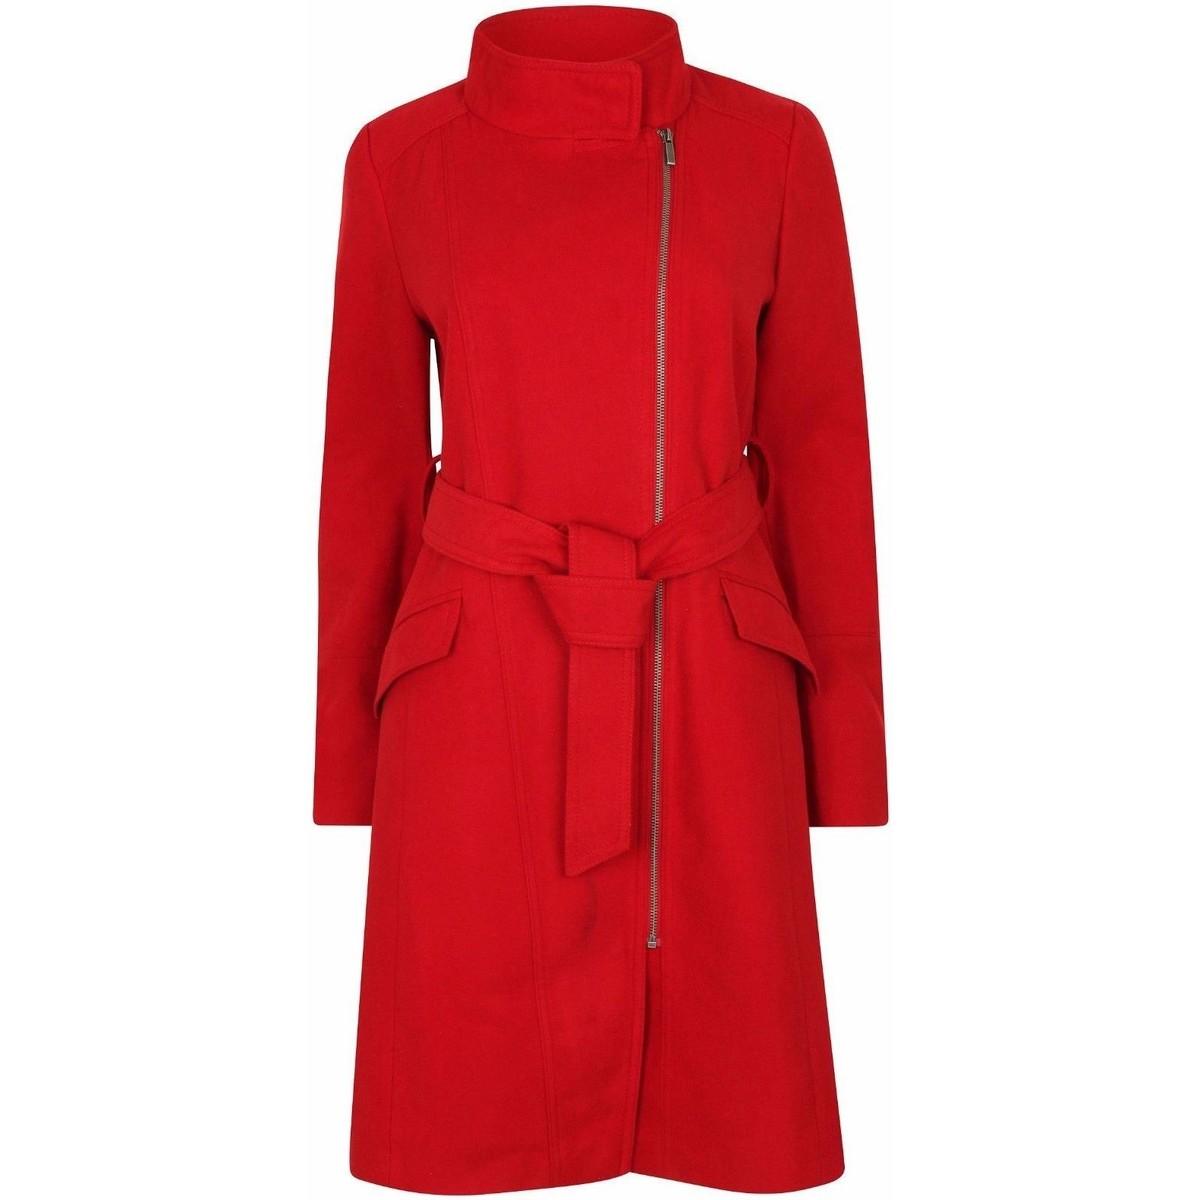 Clothing Women Parkas Anastasia Womens Red Zip Belted Winter Coat Red